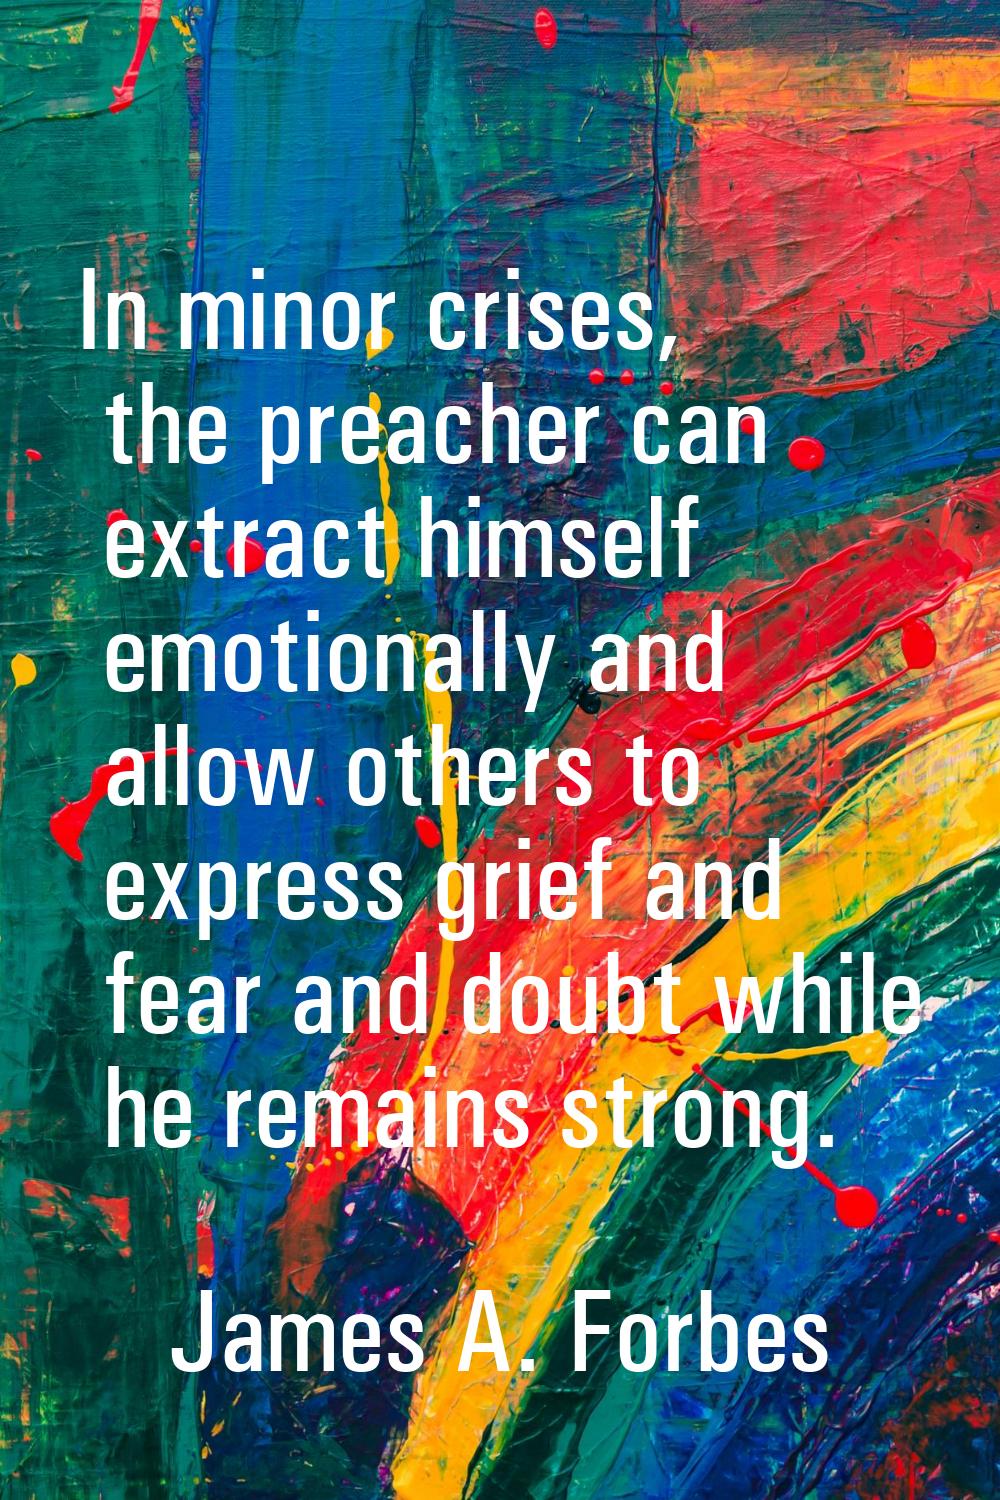 In minor crises, the preacher can extract himself emotionally and allow others to express grief and